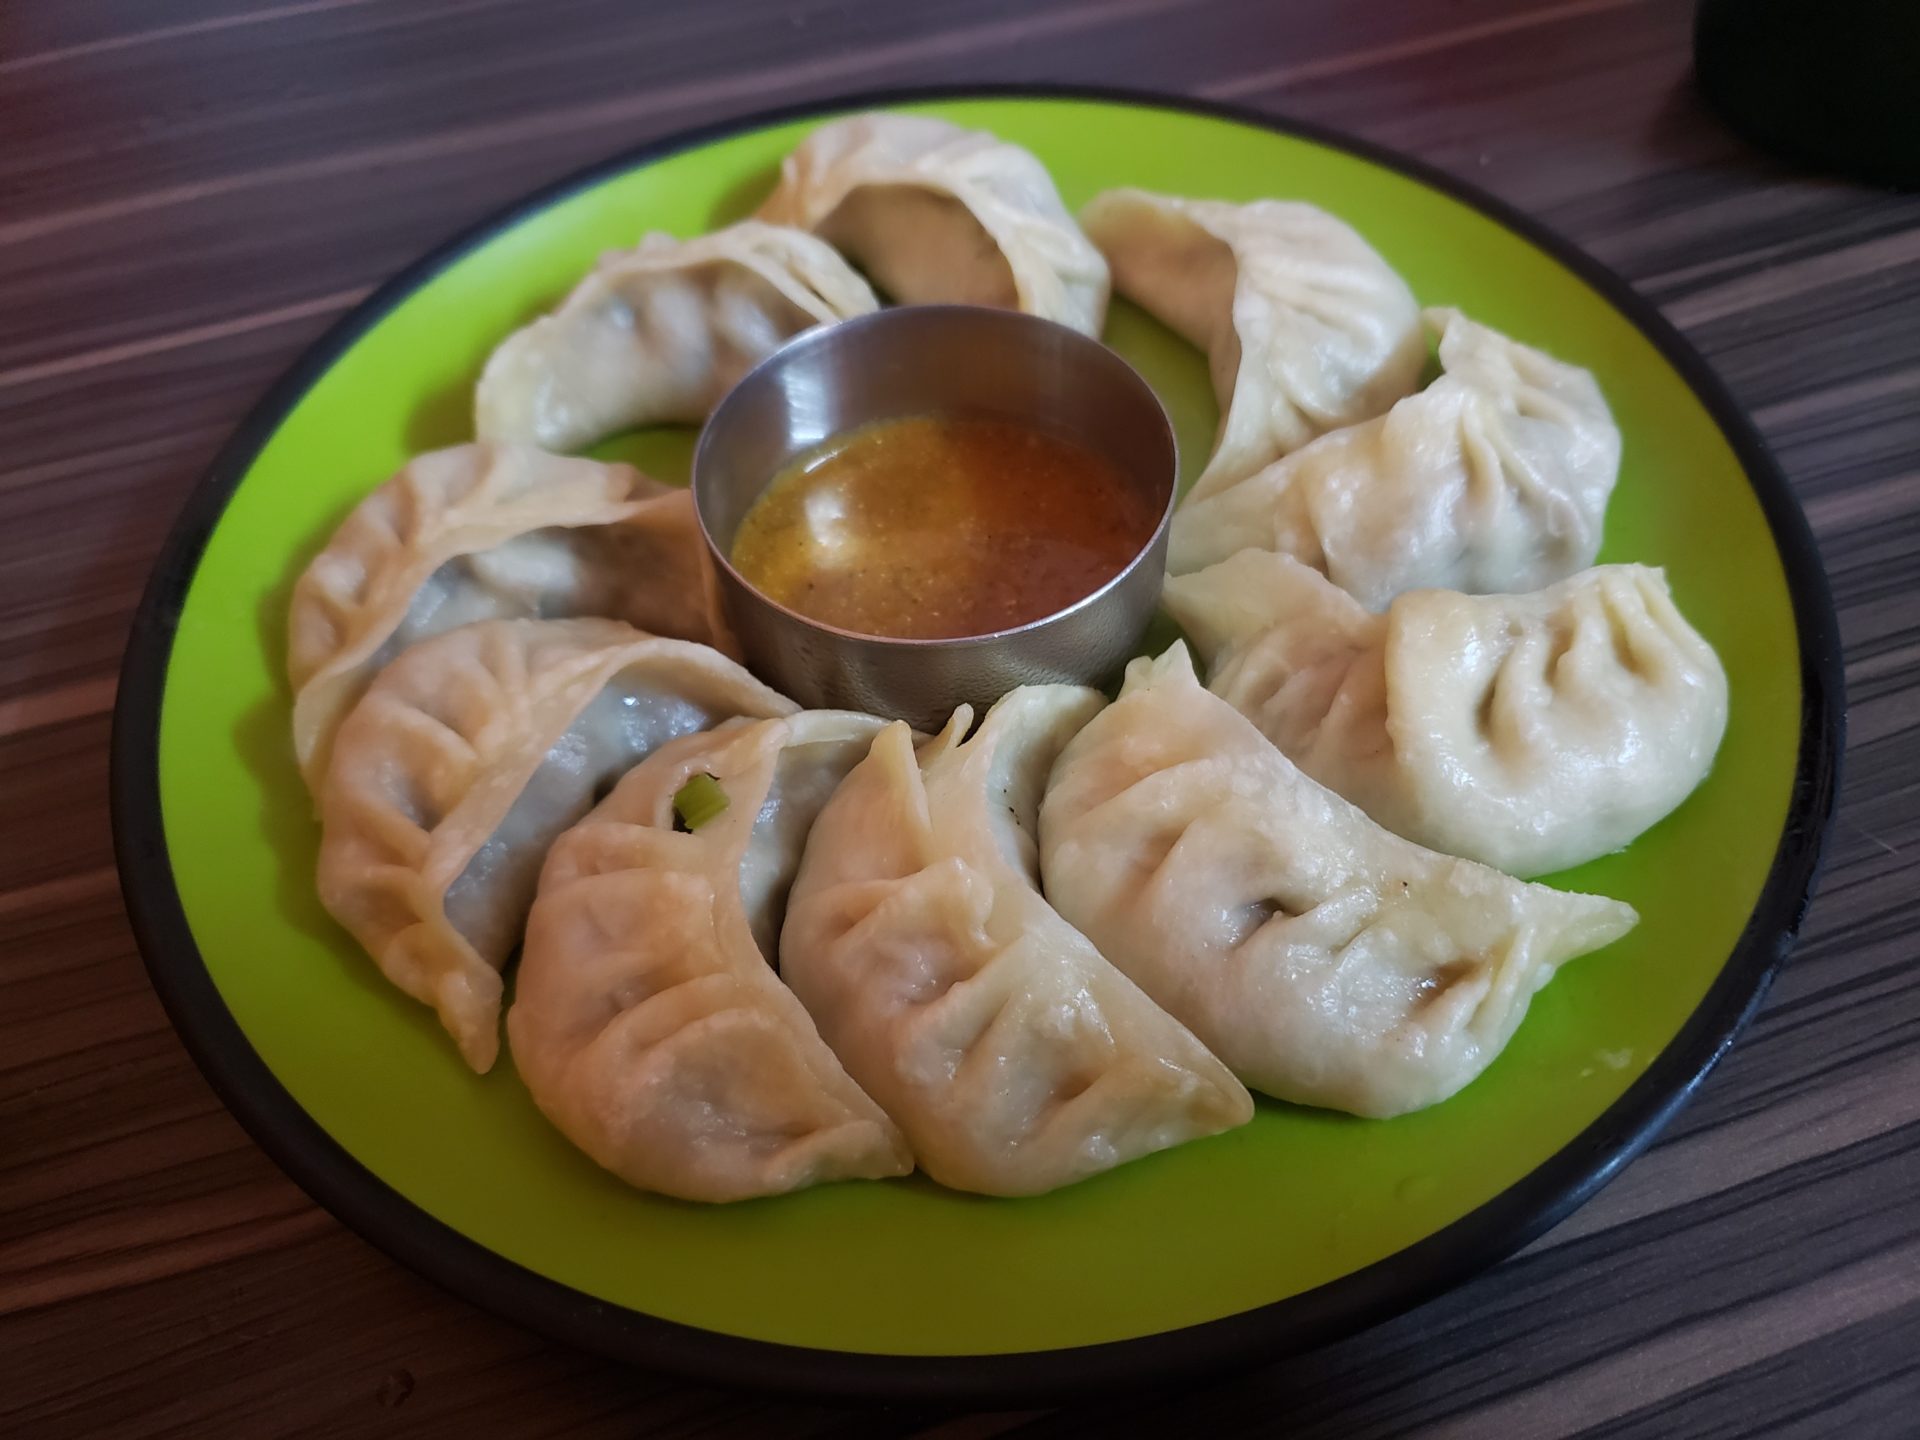 a plate of dumplings with sauce